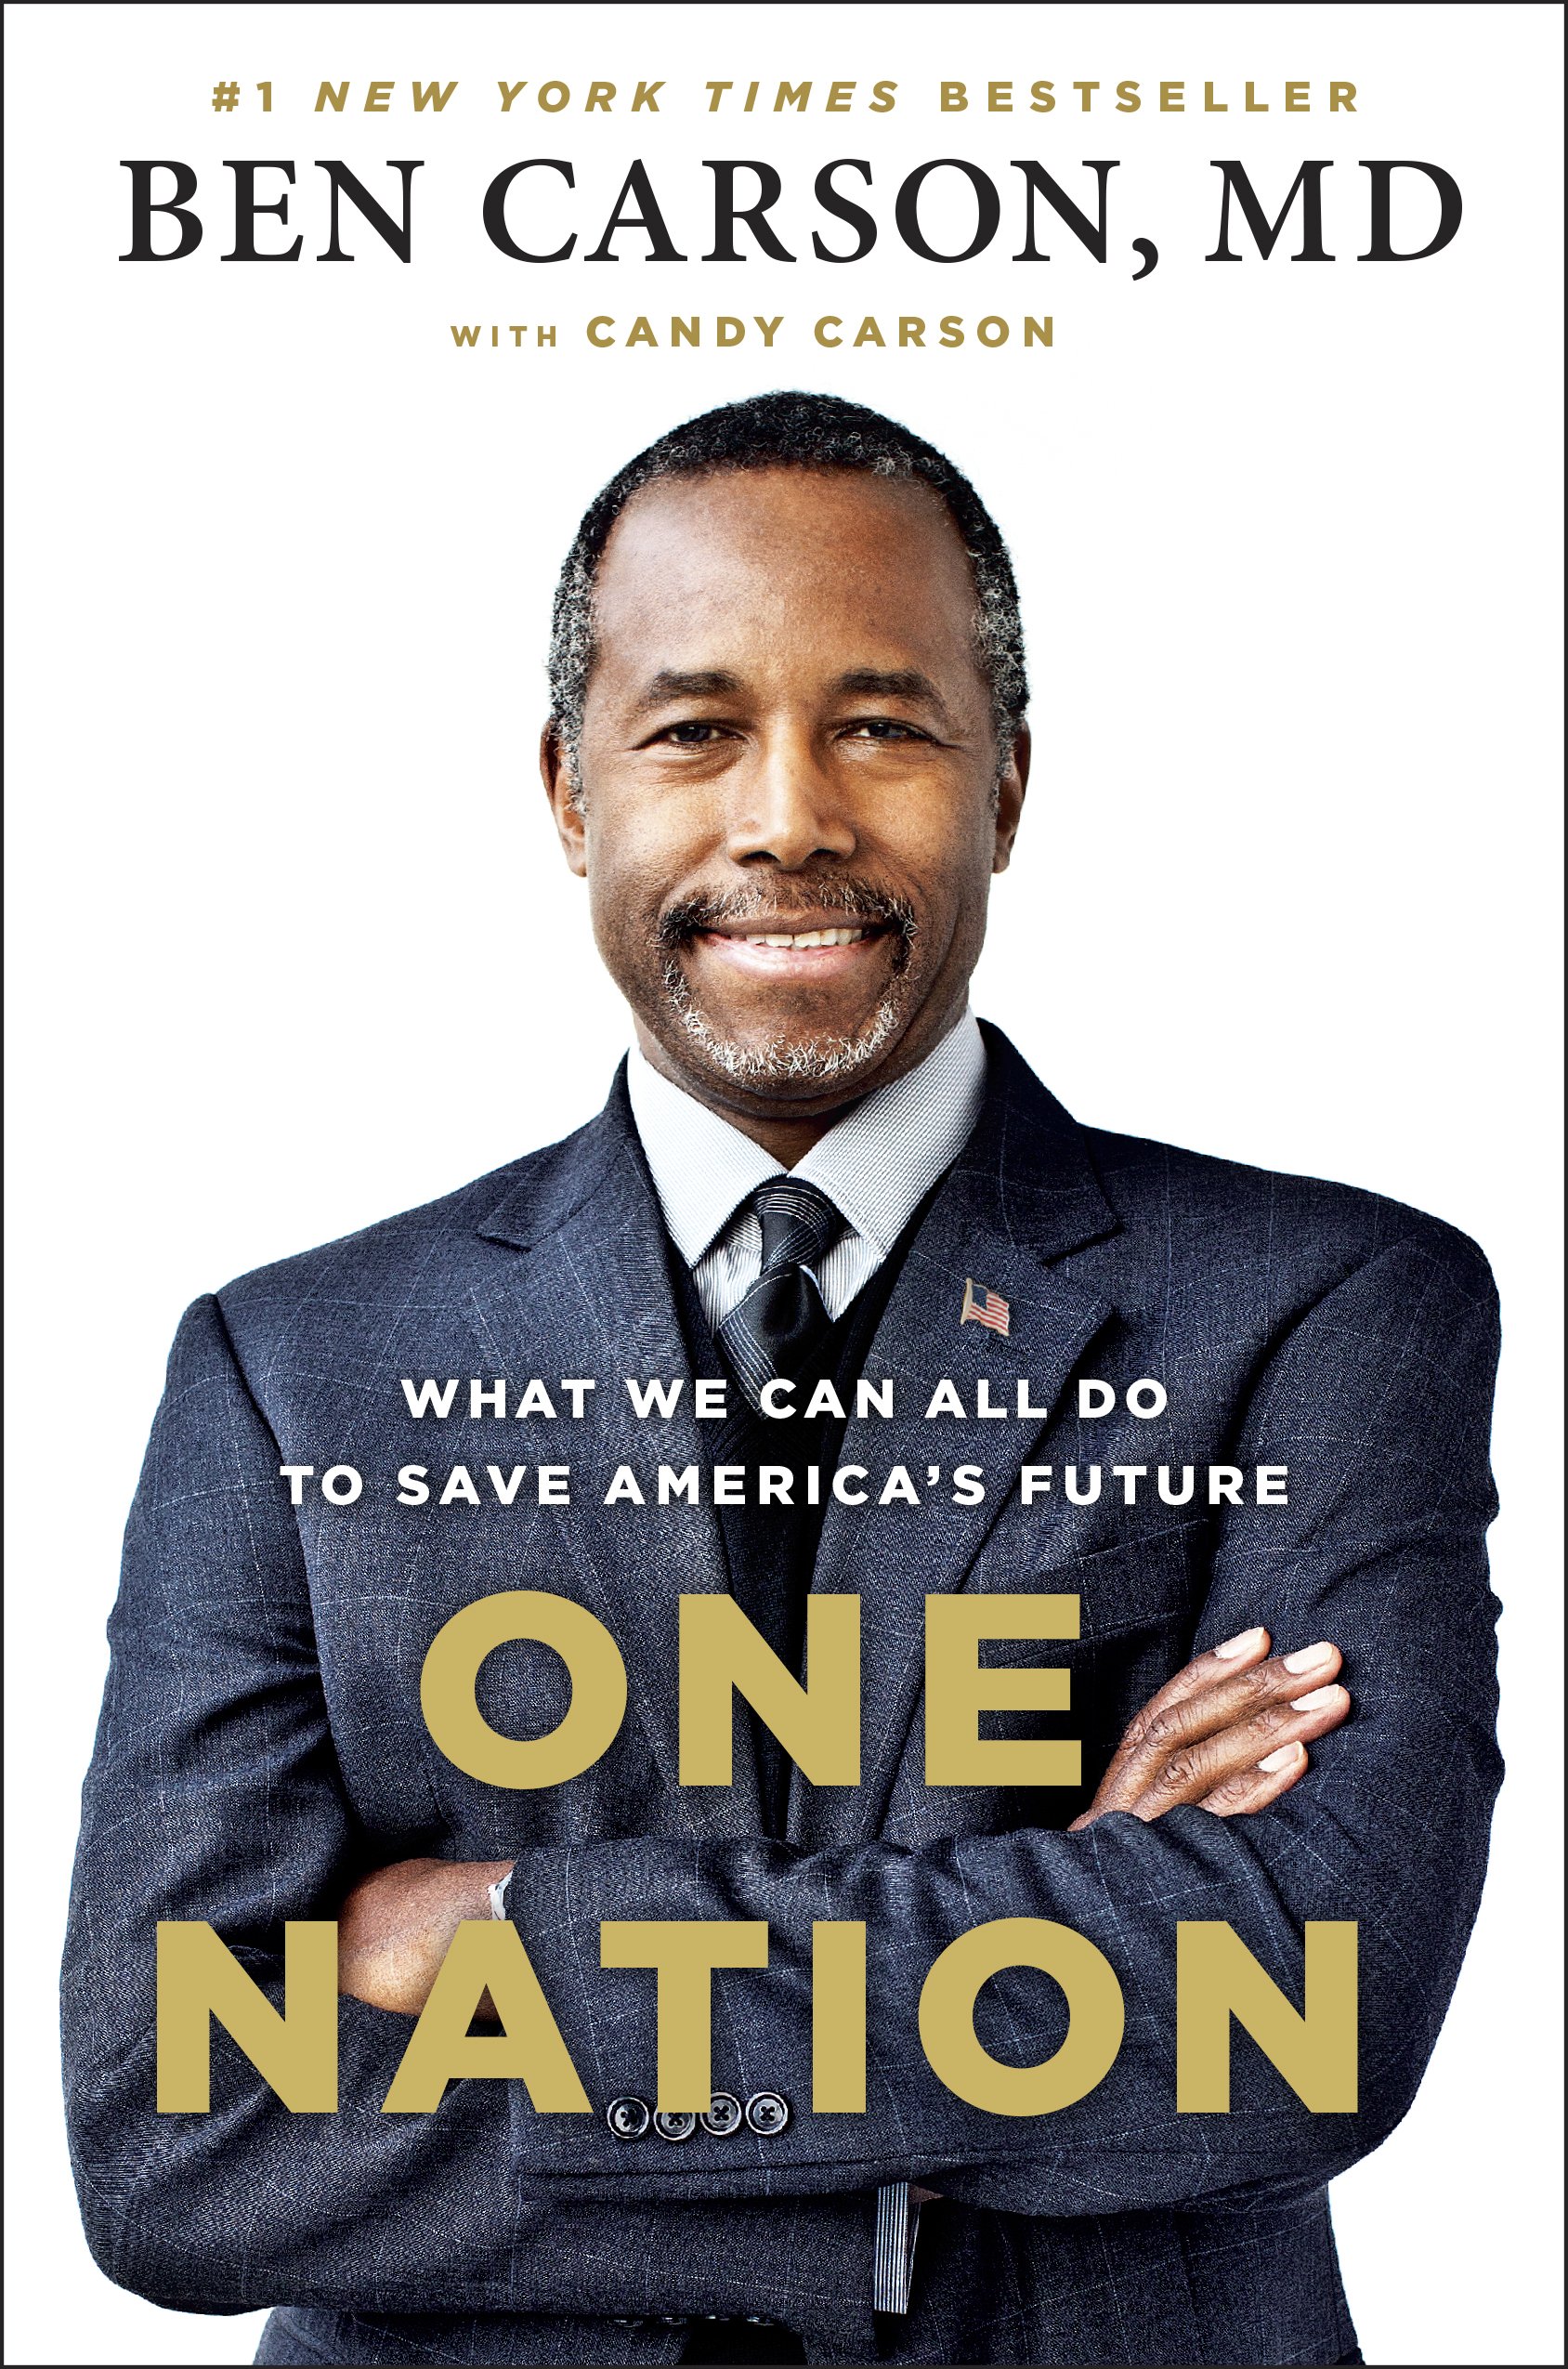 One Nation by Ben Carson